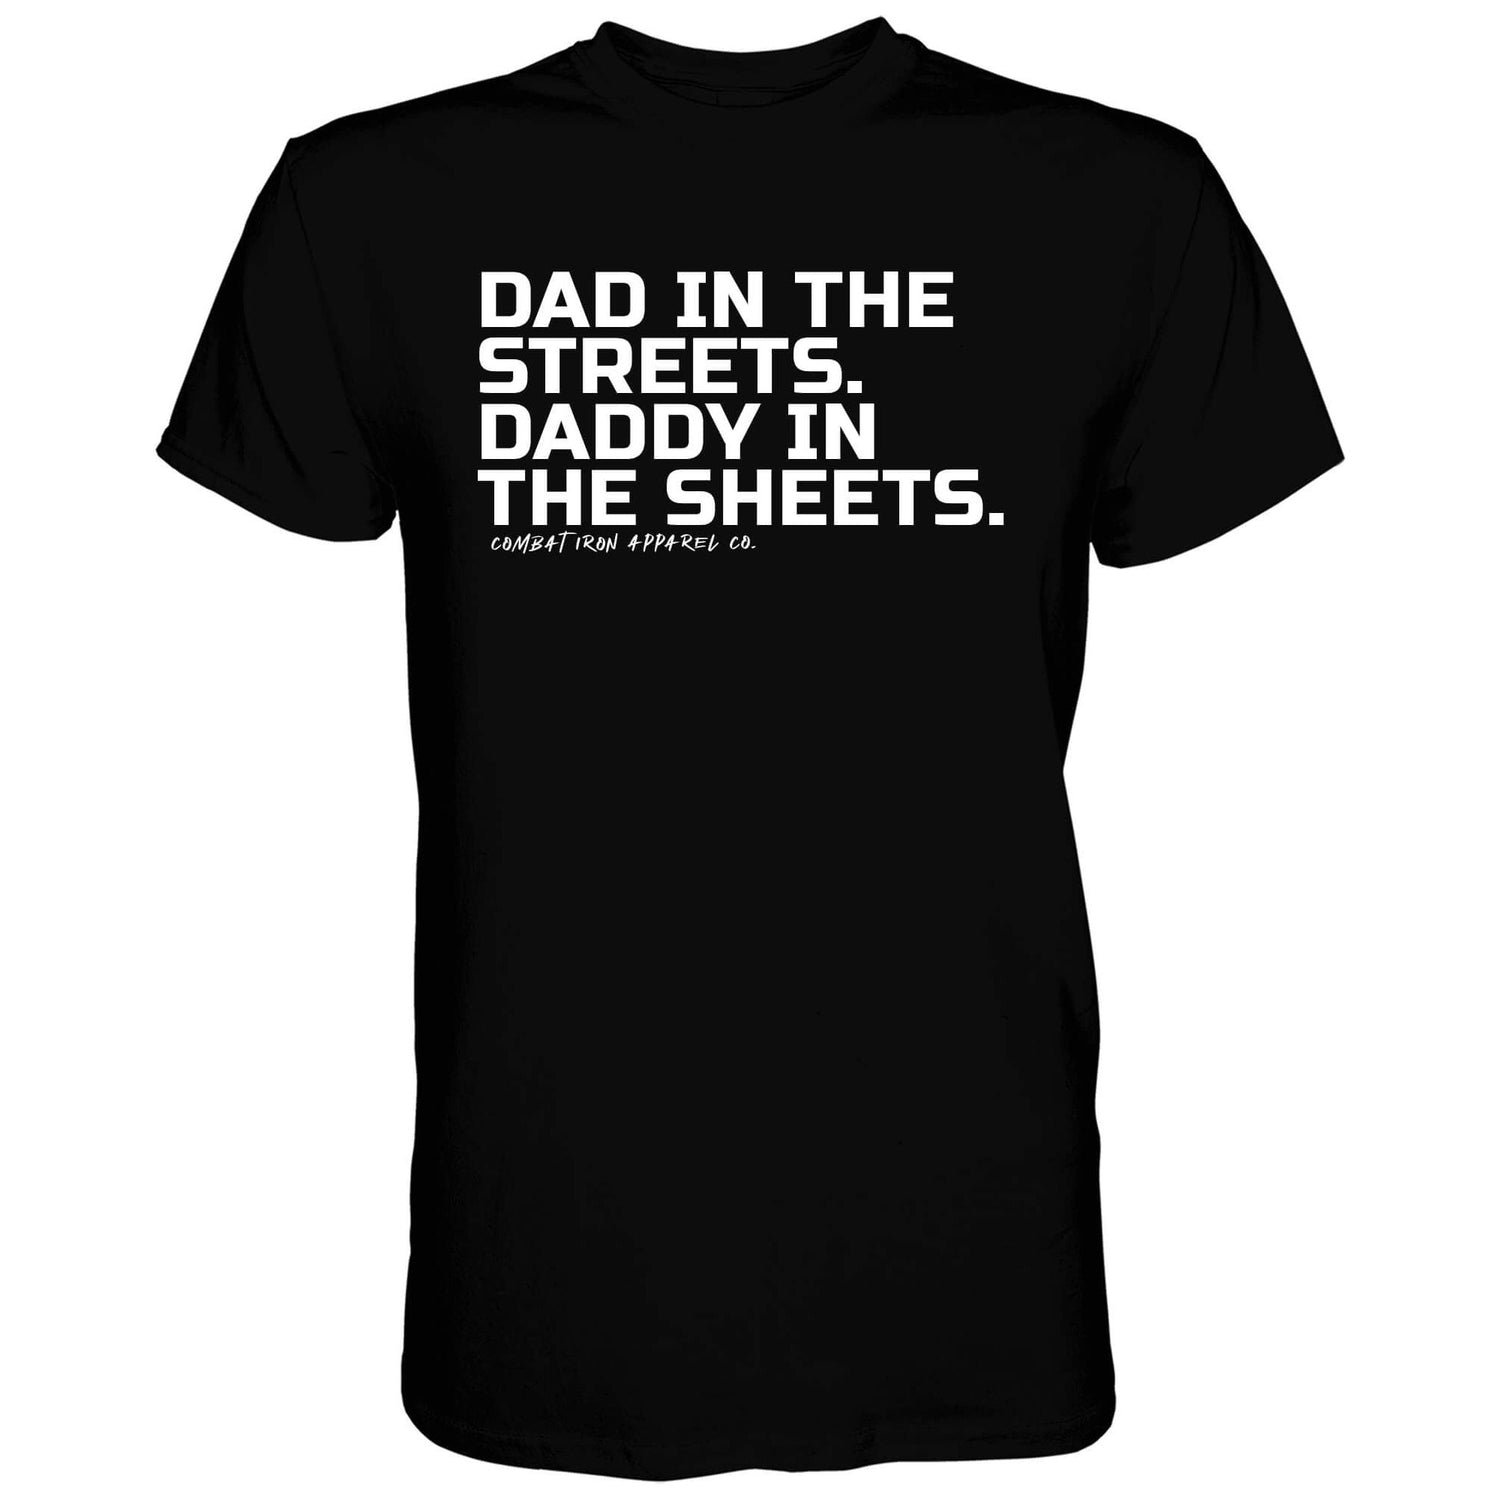 Dad in the Streets. Daddy in the Sheets. Men's T-Shirt